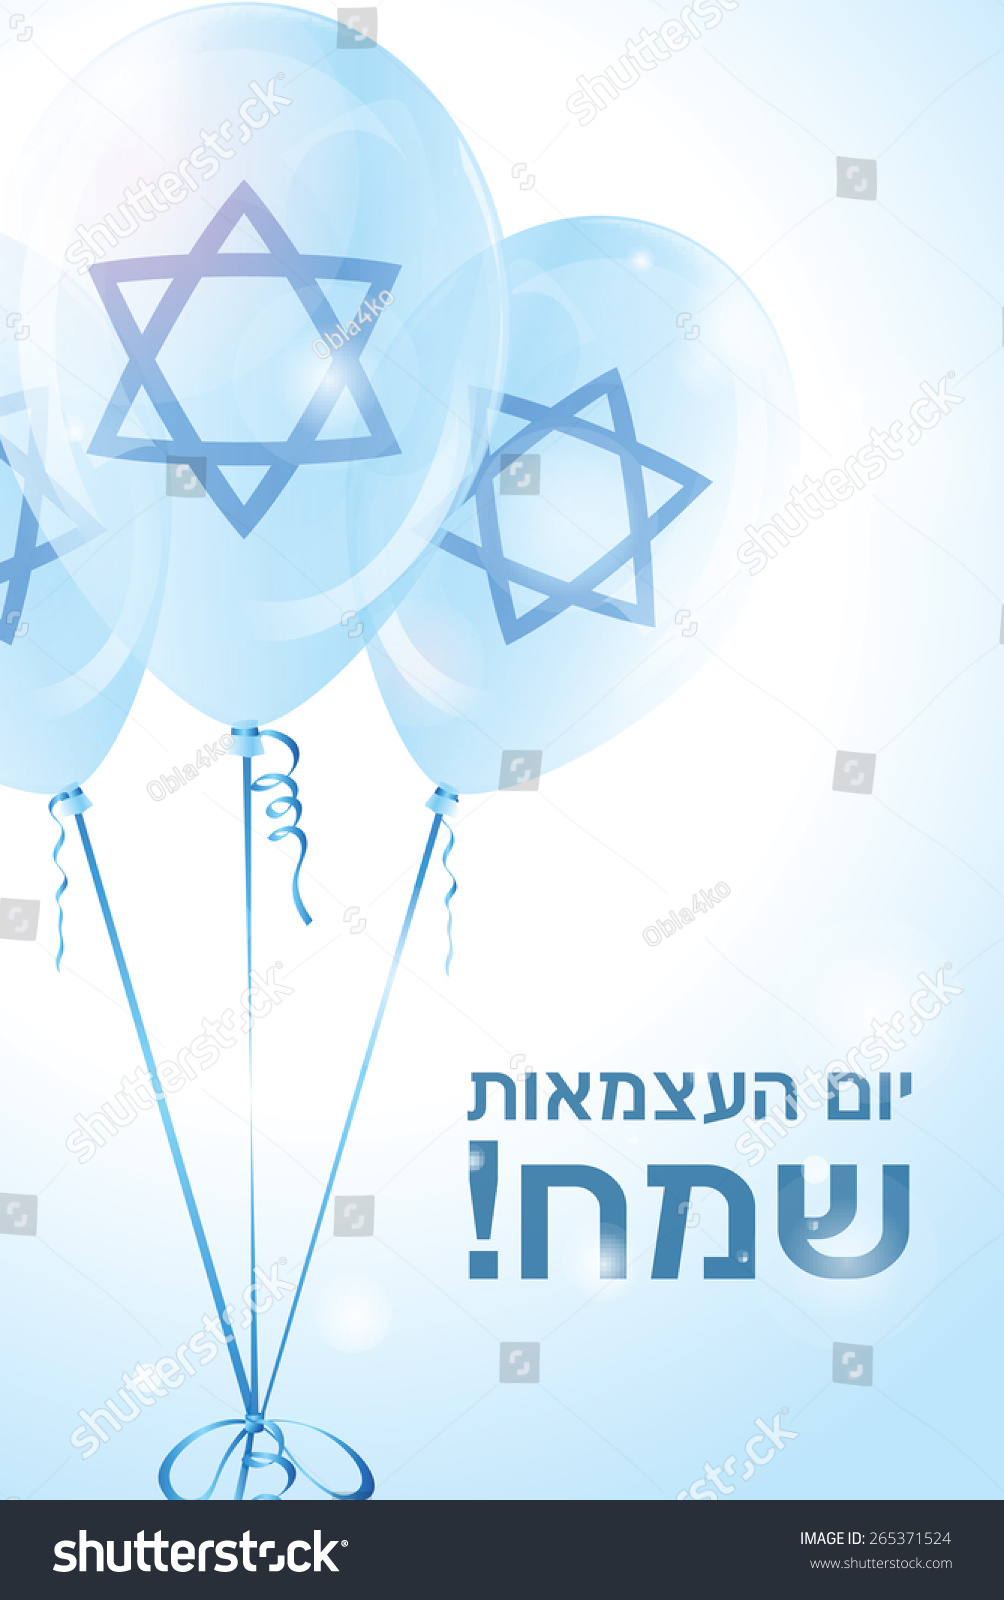 Israel Independence Day Greeting Card Message Stock Vector (Royalty Free) 265371524